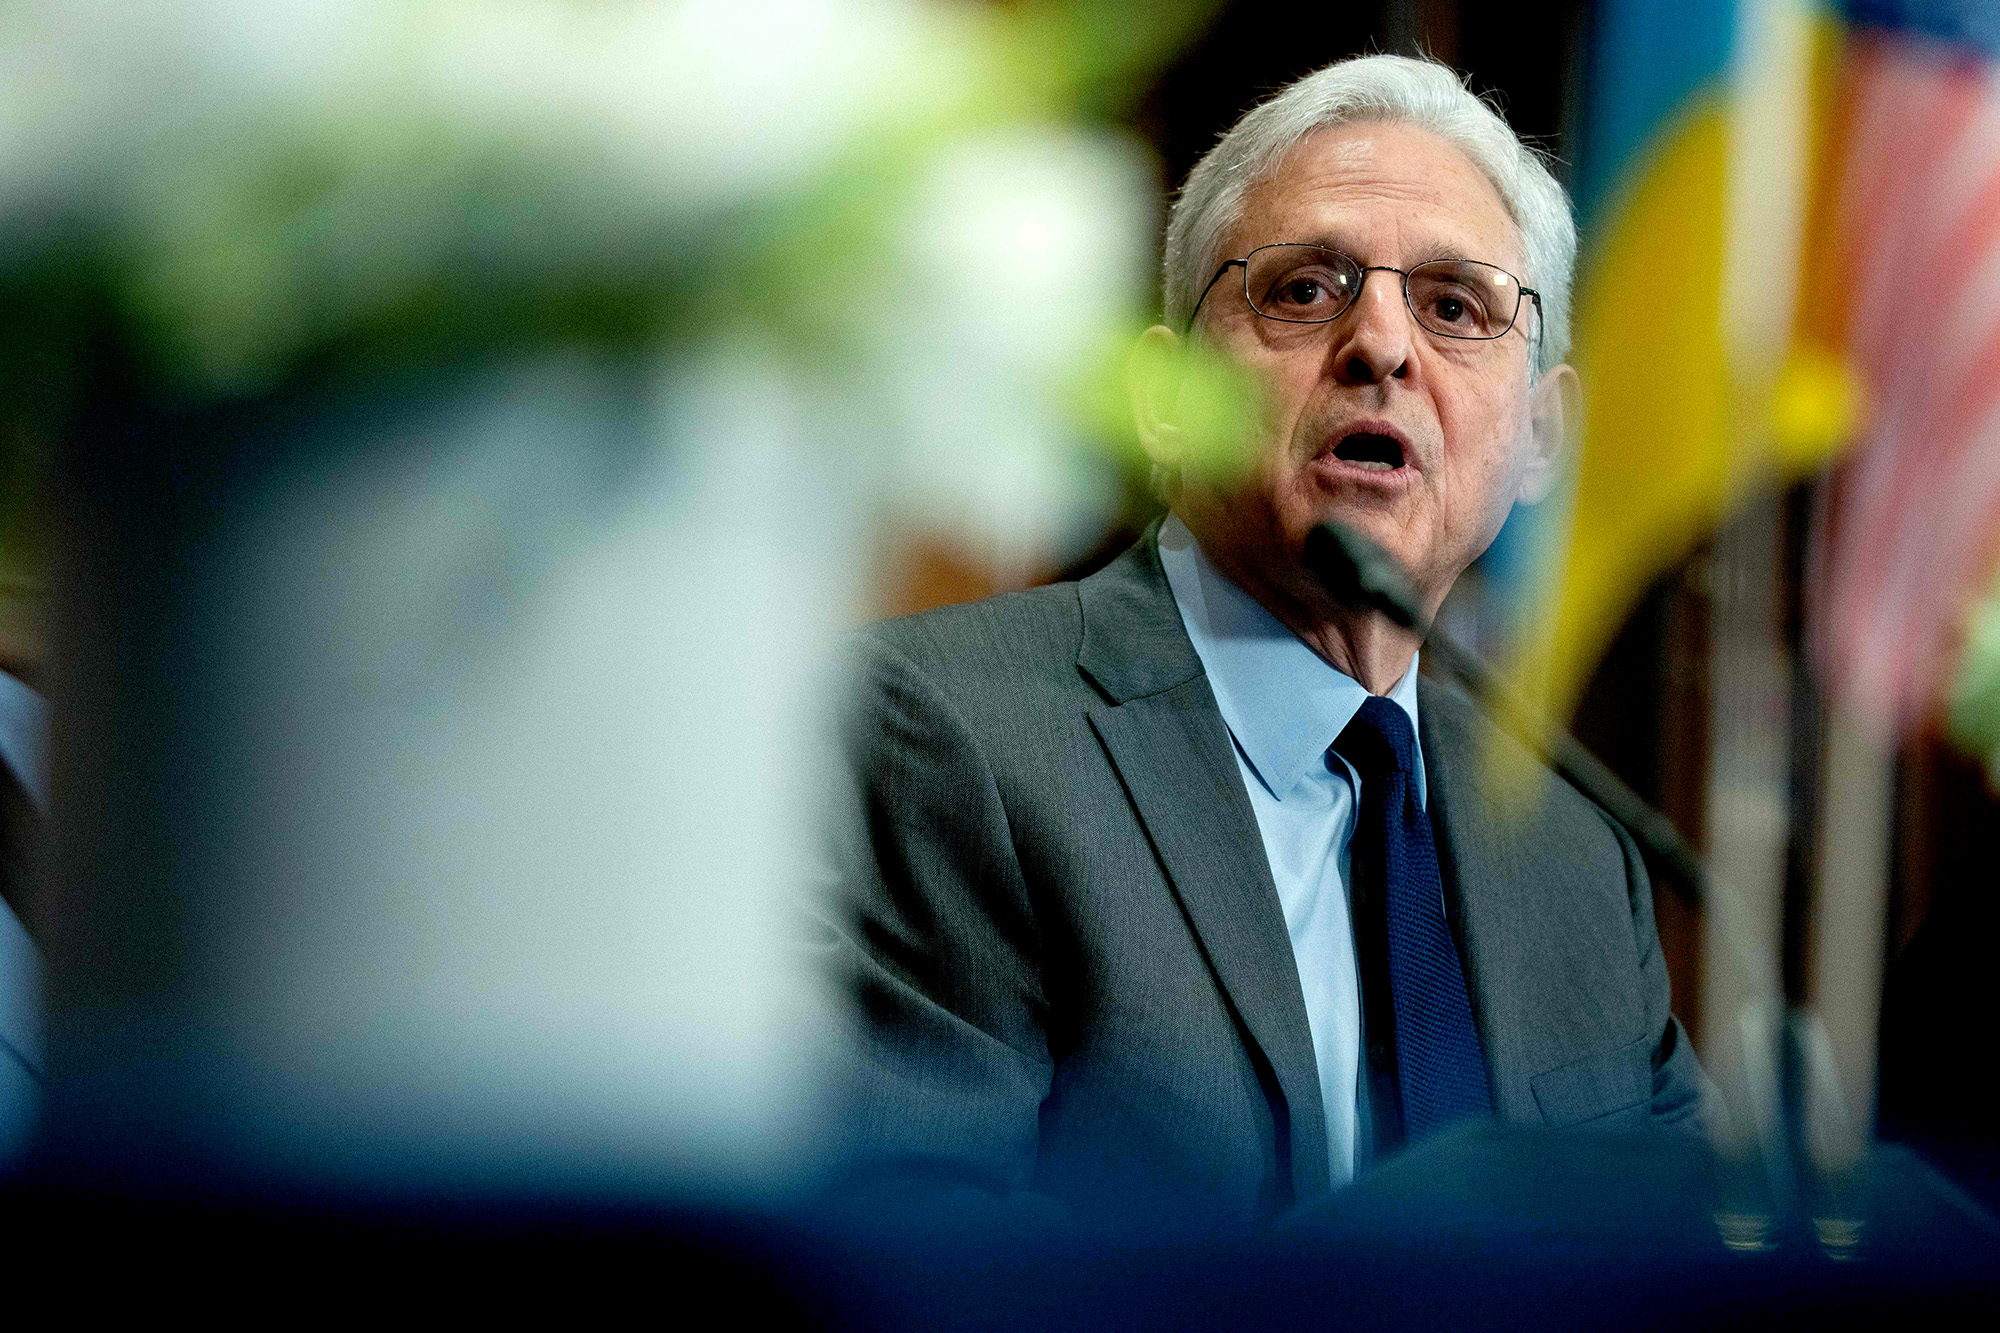 US Attorney General Merrick Garland speaks during a meeting with Ukrainian Prosecutor General Andriy Kostin at the US Department of Justice in Washington, DC, on April 17.